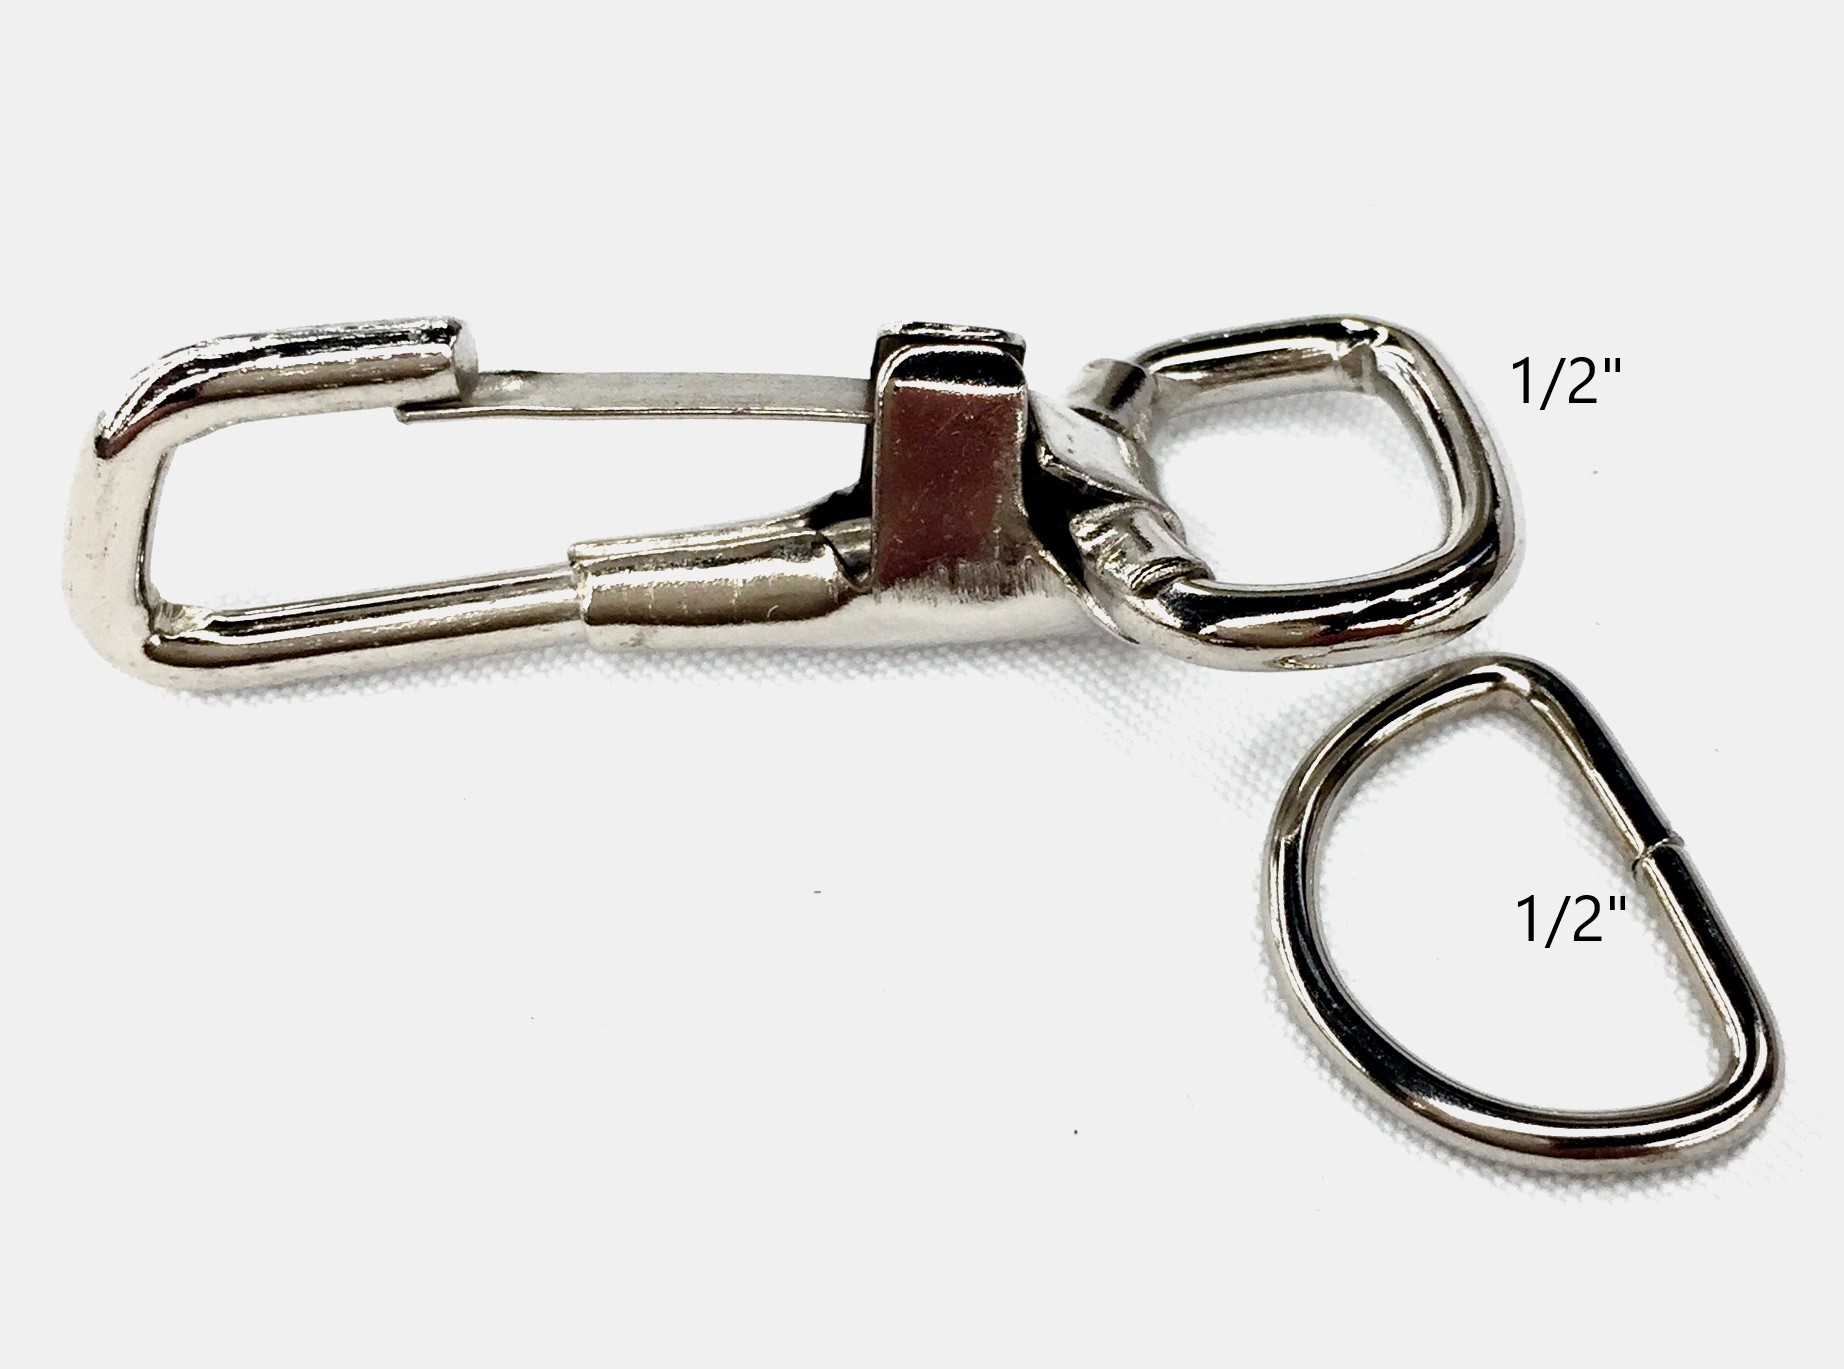 1/2 Snap Hooks with D-Rings - 6 Pack